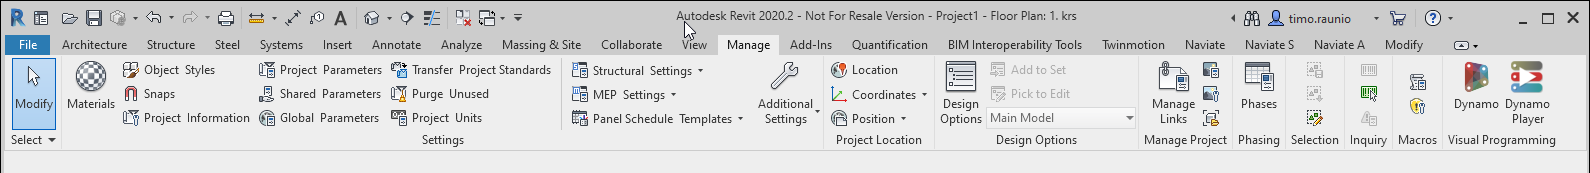 How To Upgrade Your Revit Files To New Revit Version With Dynamo